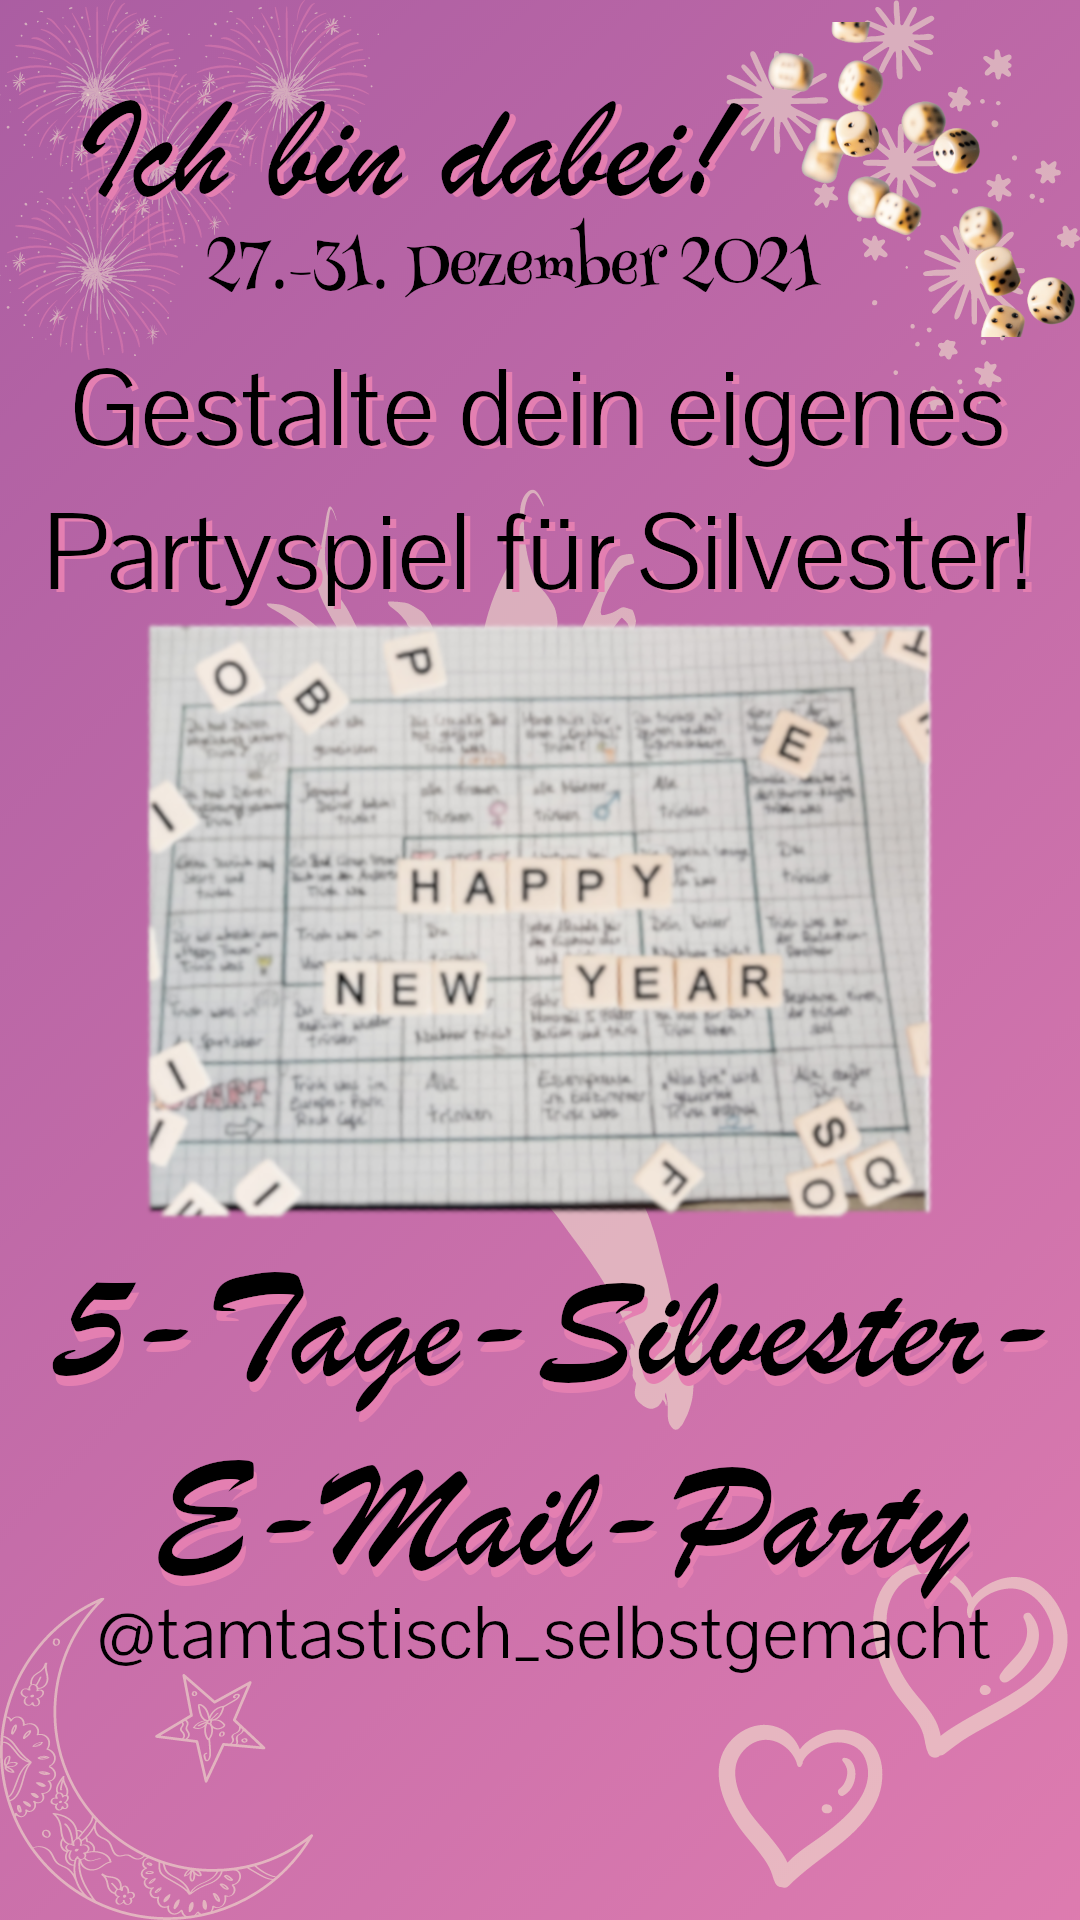 5-Tage-Silvester-E-Mail-Party: Ich bin dabei!